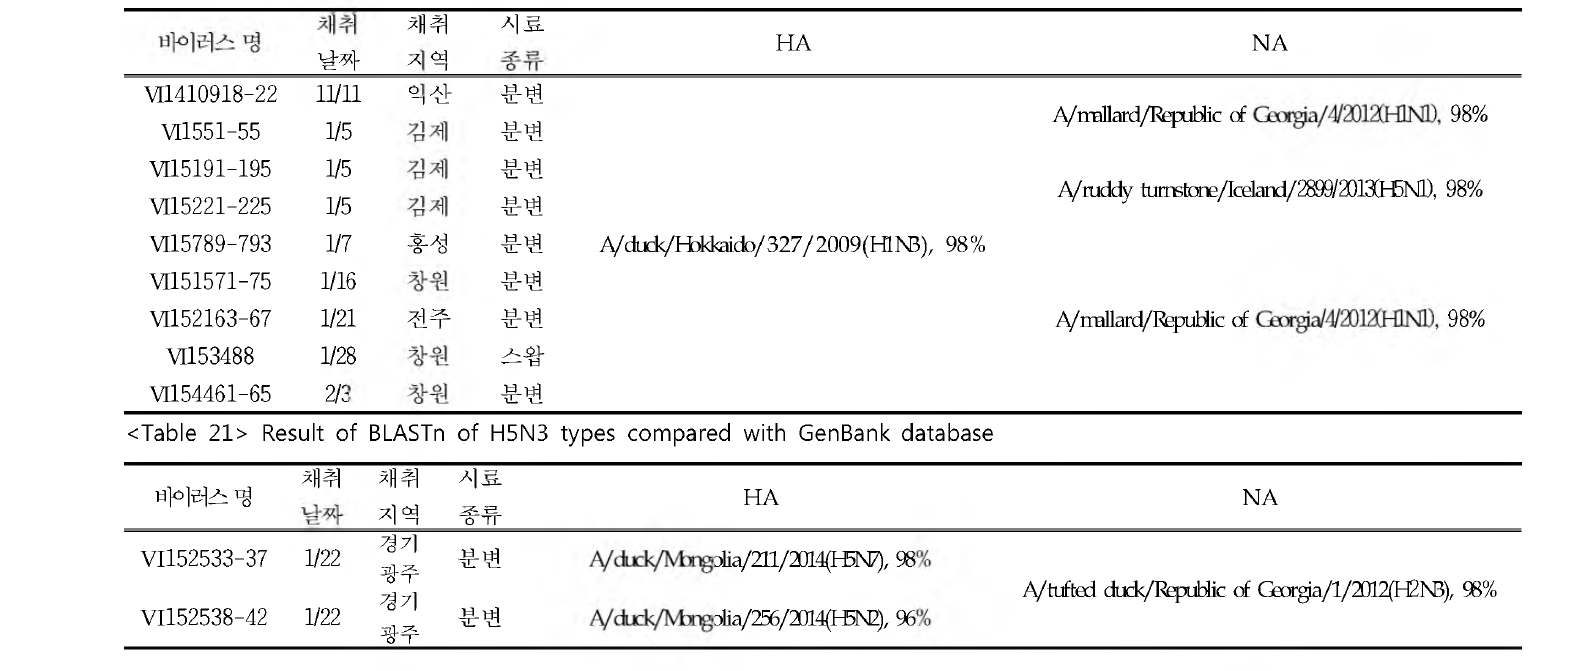 Result of BLASTn of H5N3 types compared with GenBank database